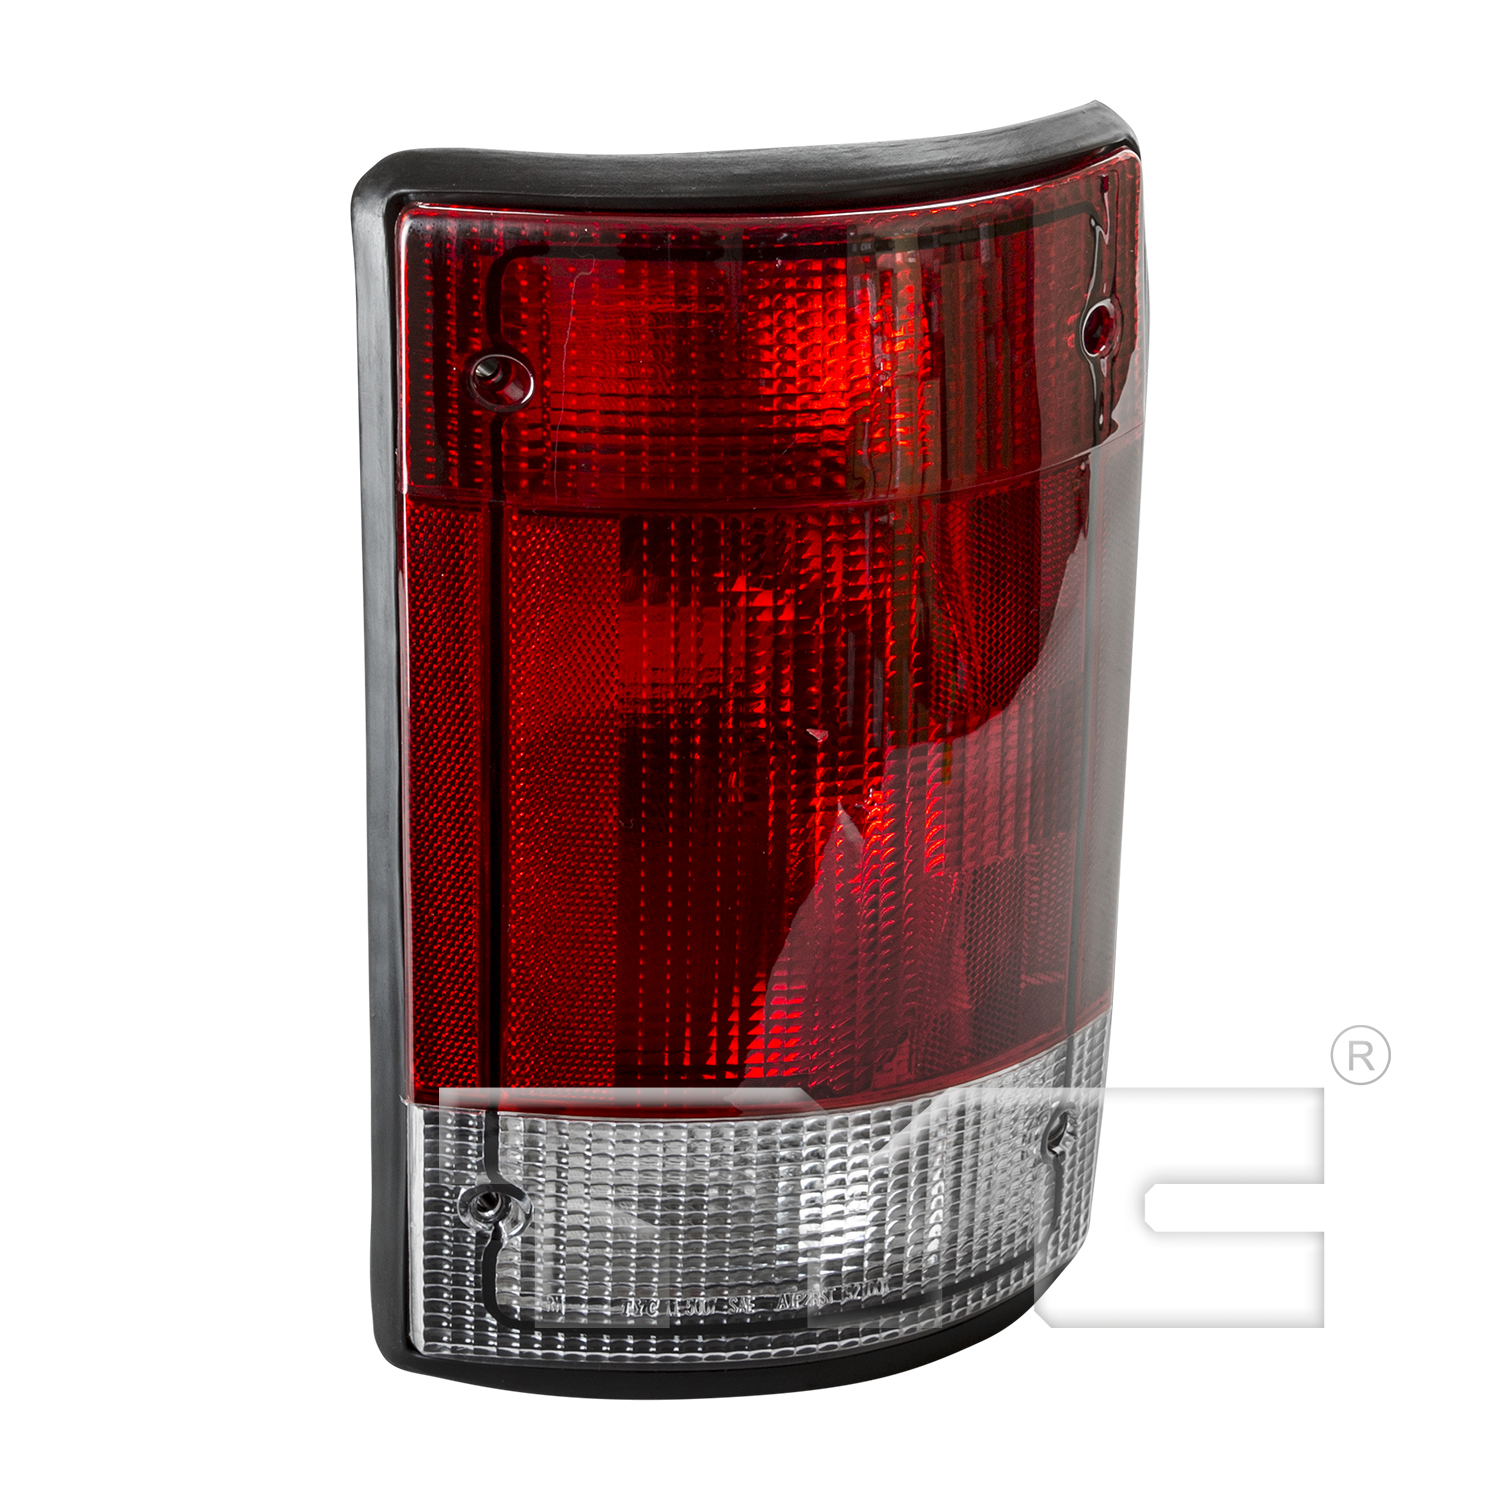 Aftermarket TAILLIGHTS for FORD - E-350 CLUB WAGON, E-350 CLUB WAGON,04-05,RT Taillamp assy